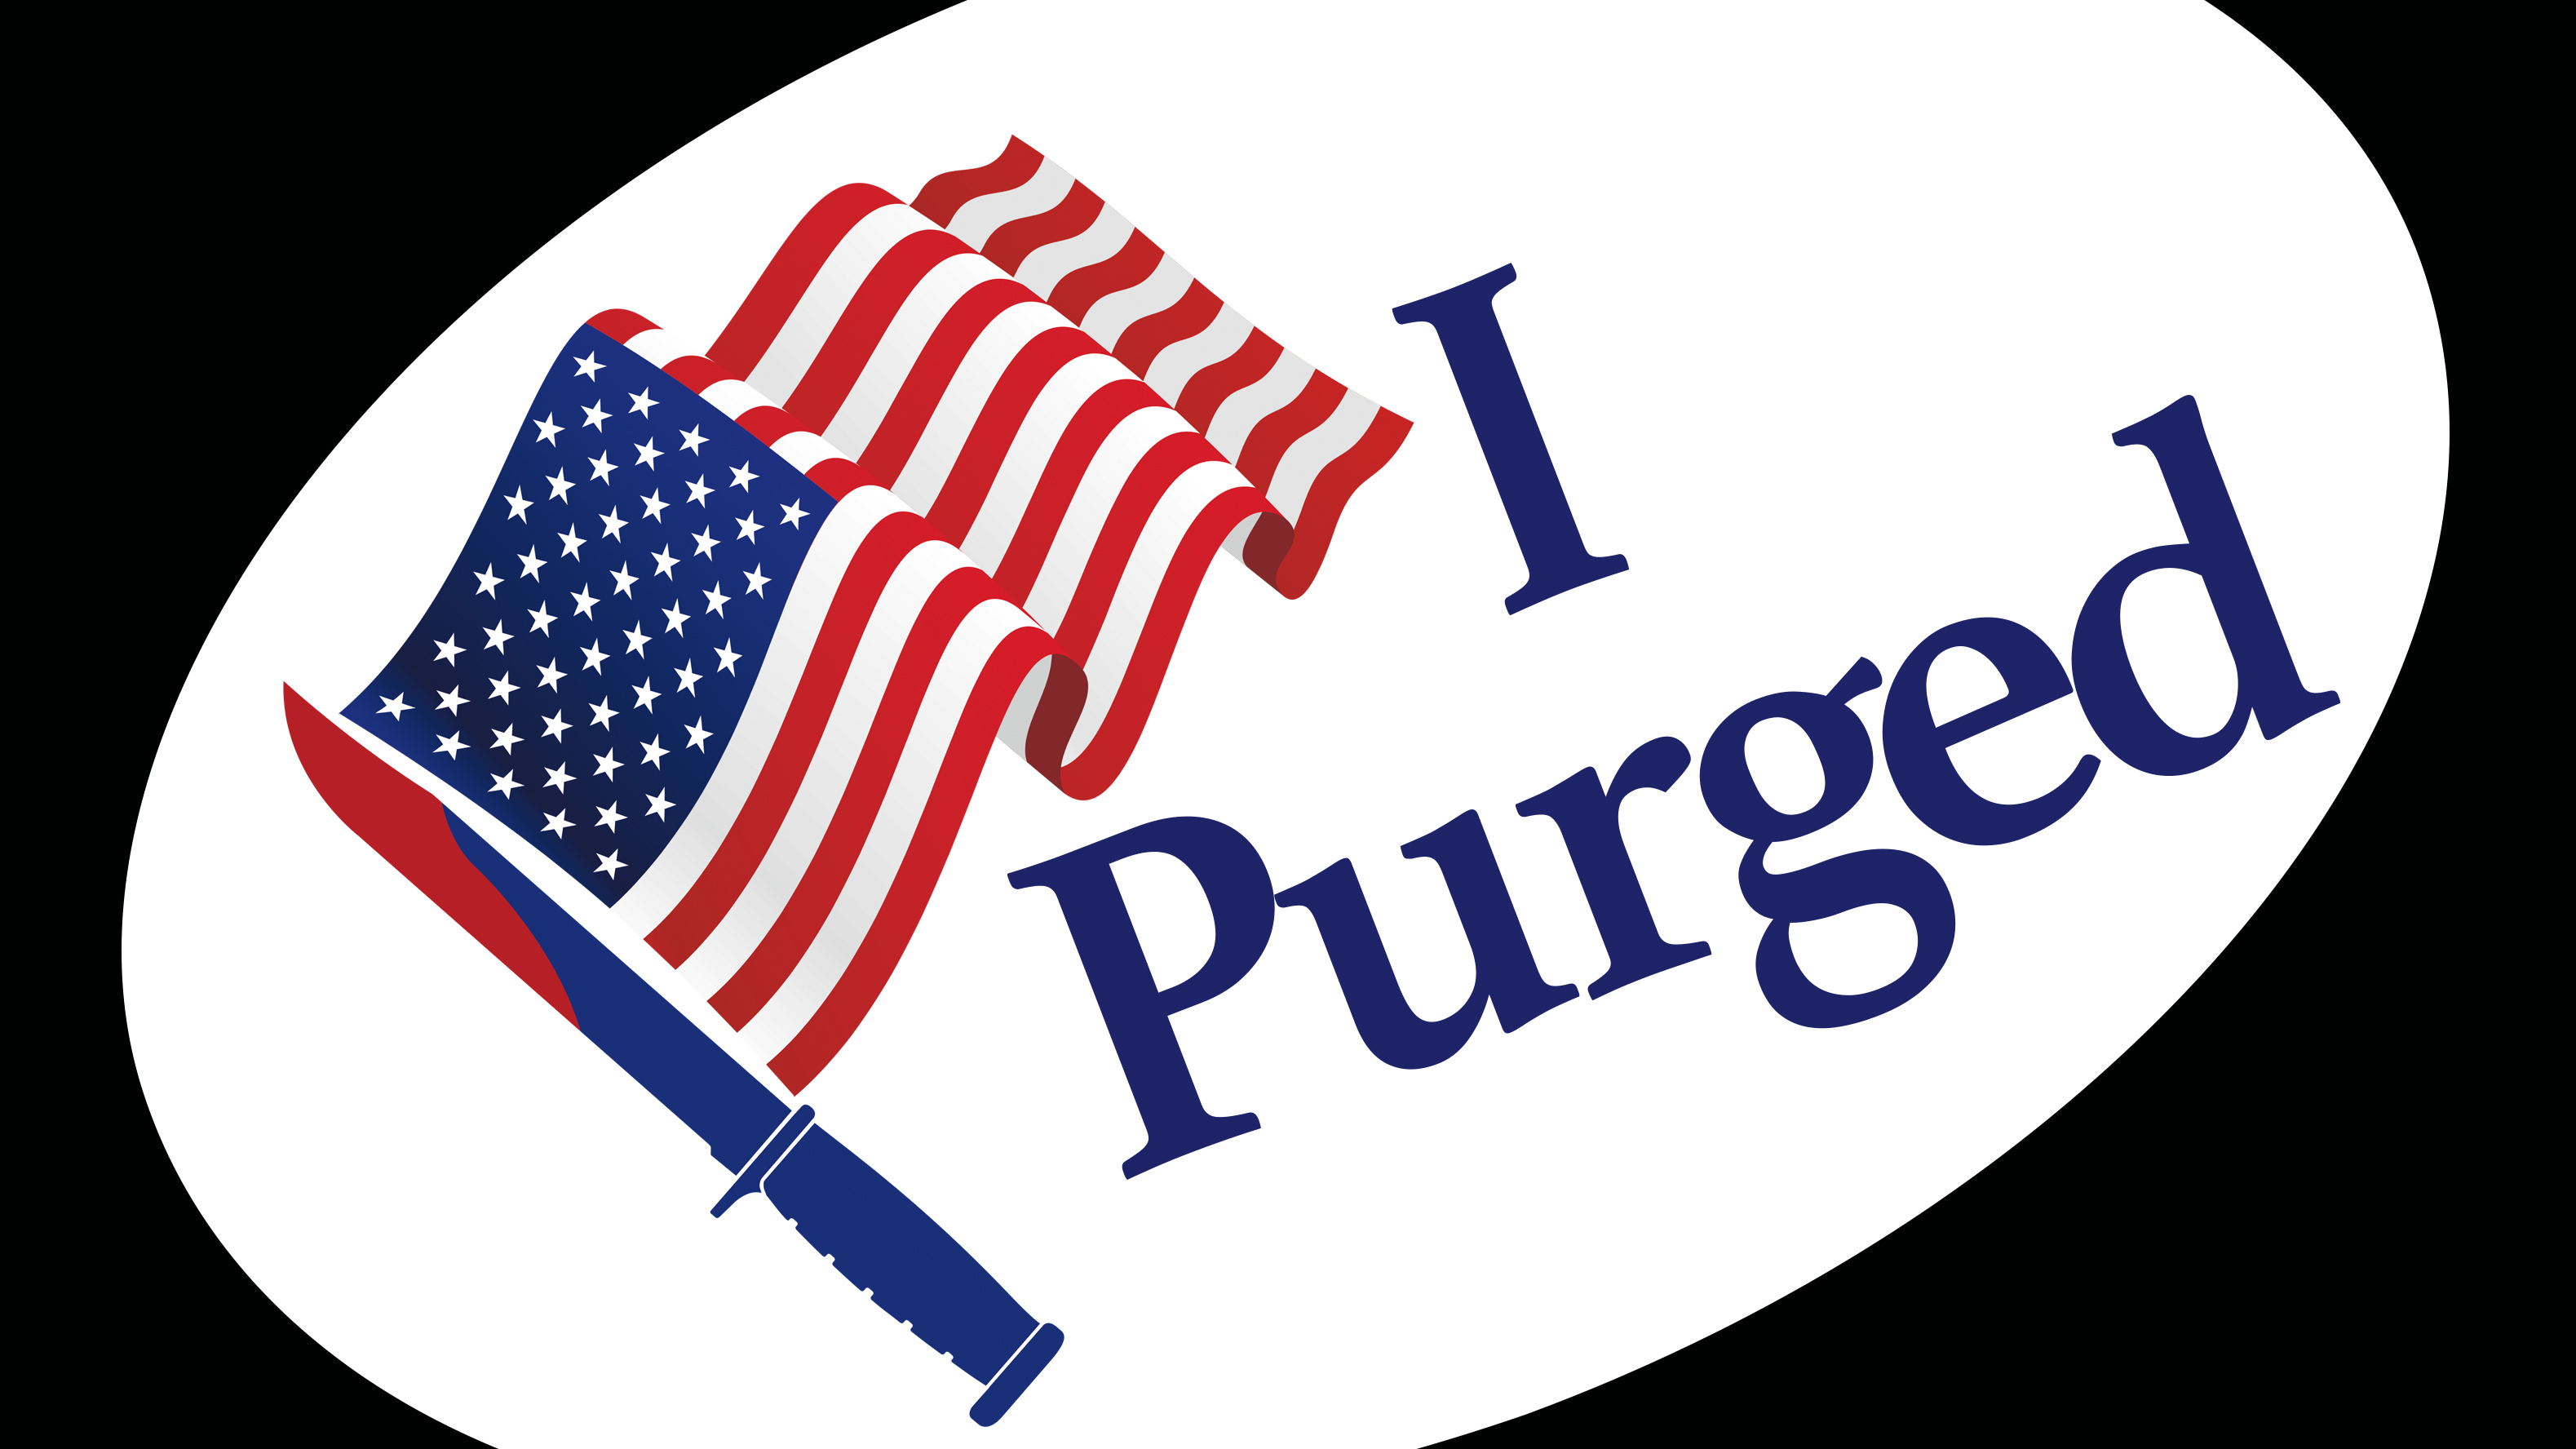 This Week’s Sequel Review: THE PURGE: ELECTION YEAR